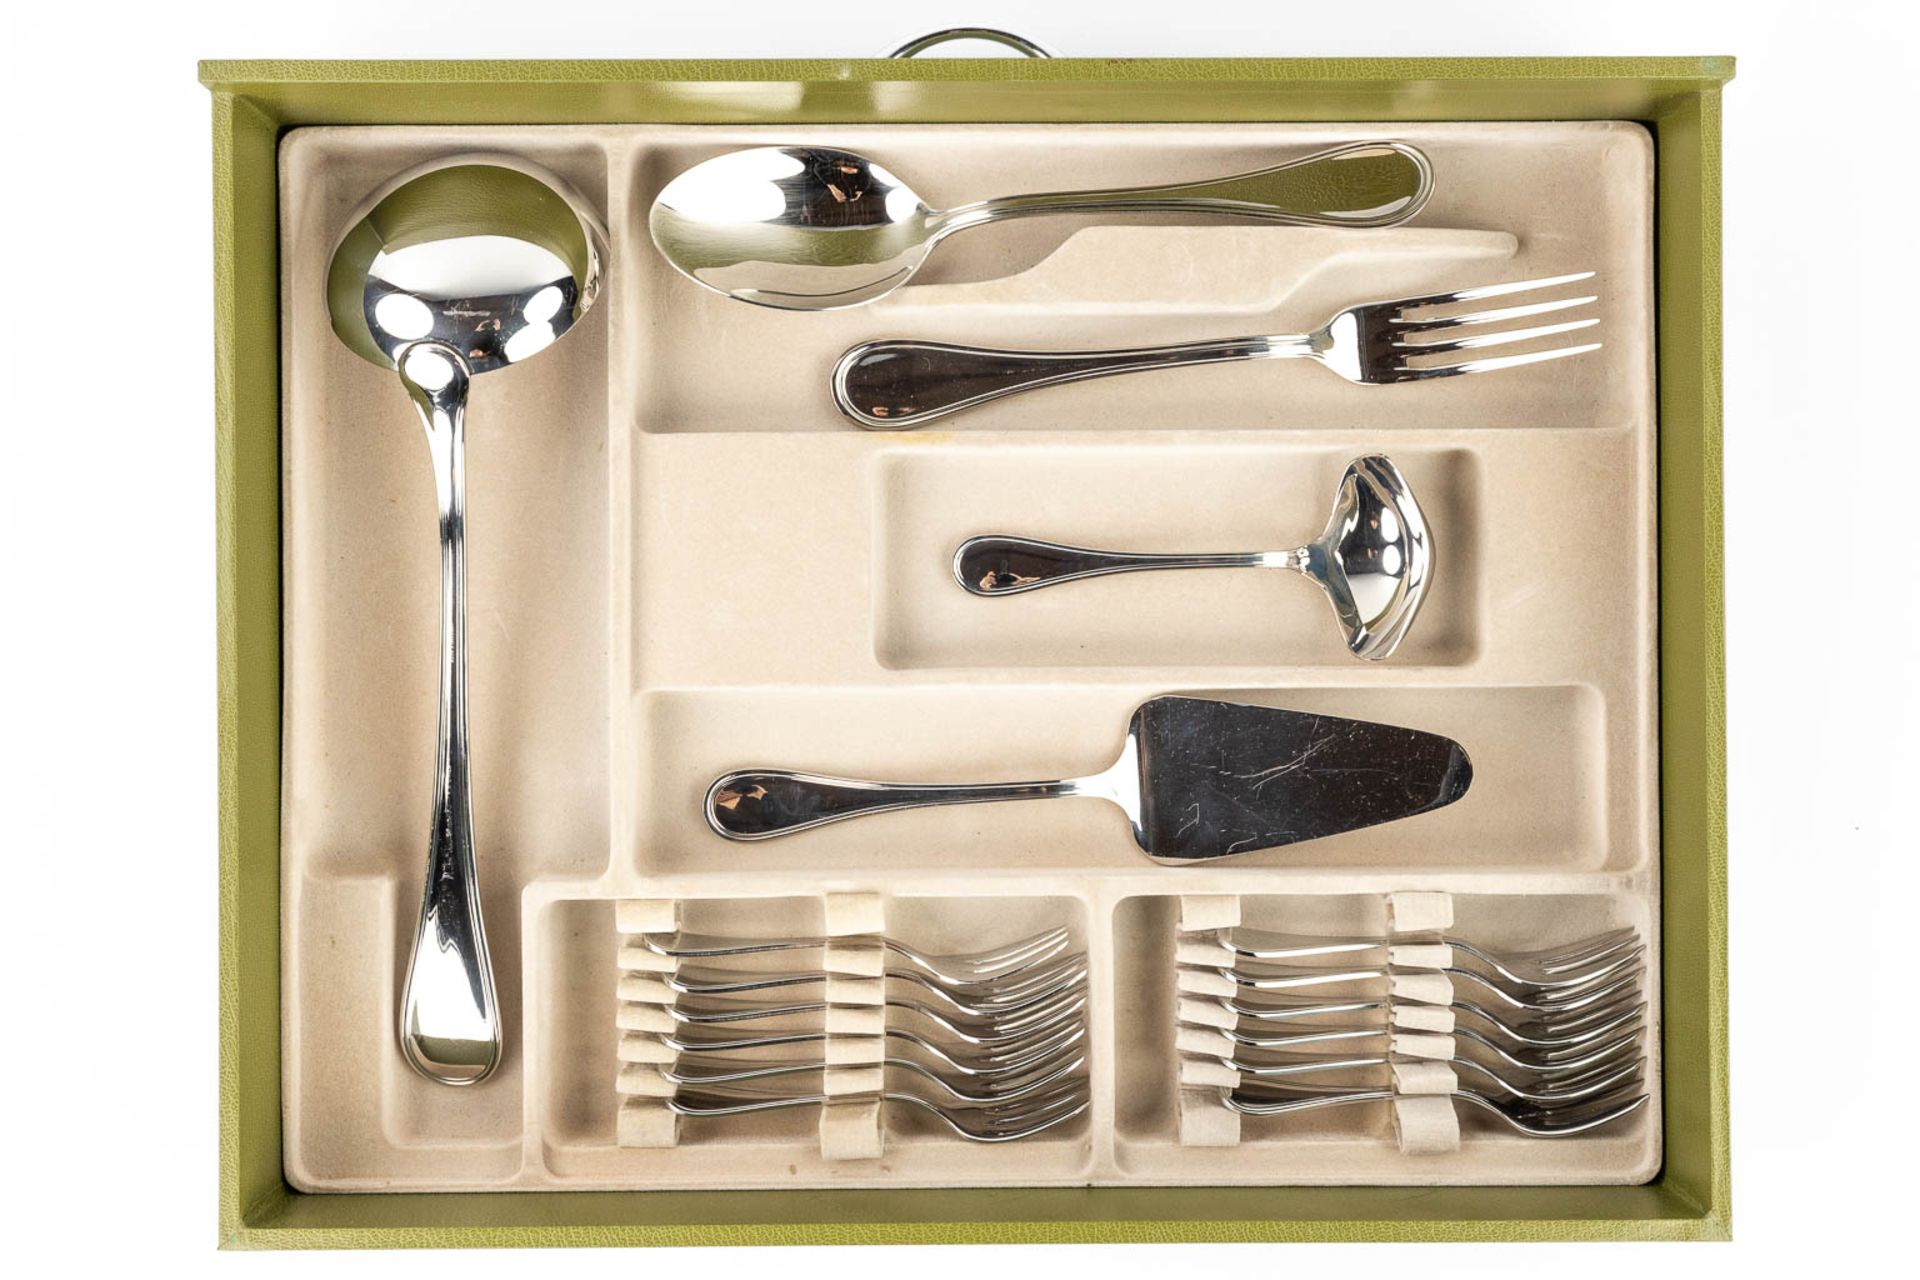 Christofle, model 'Albi' in an 'ambassador 125' case, a 124-piece flatware set, stainless steel. (L - Image 6 of 12